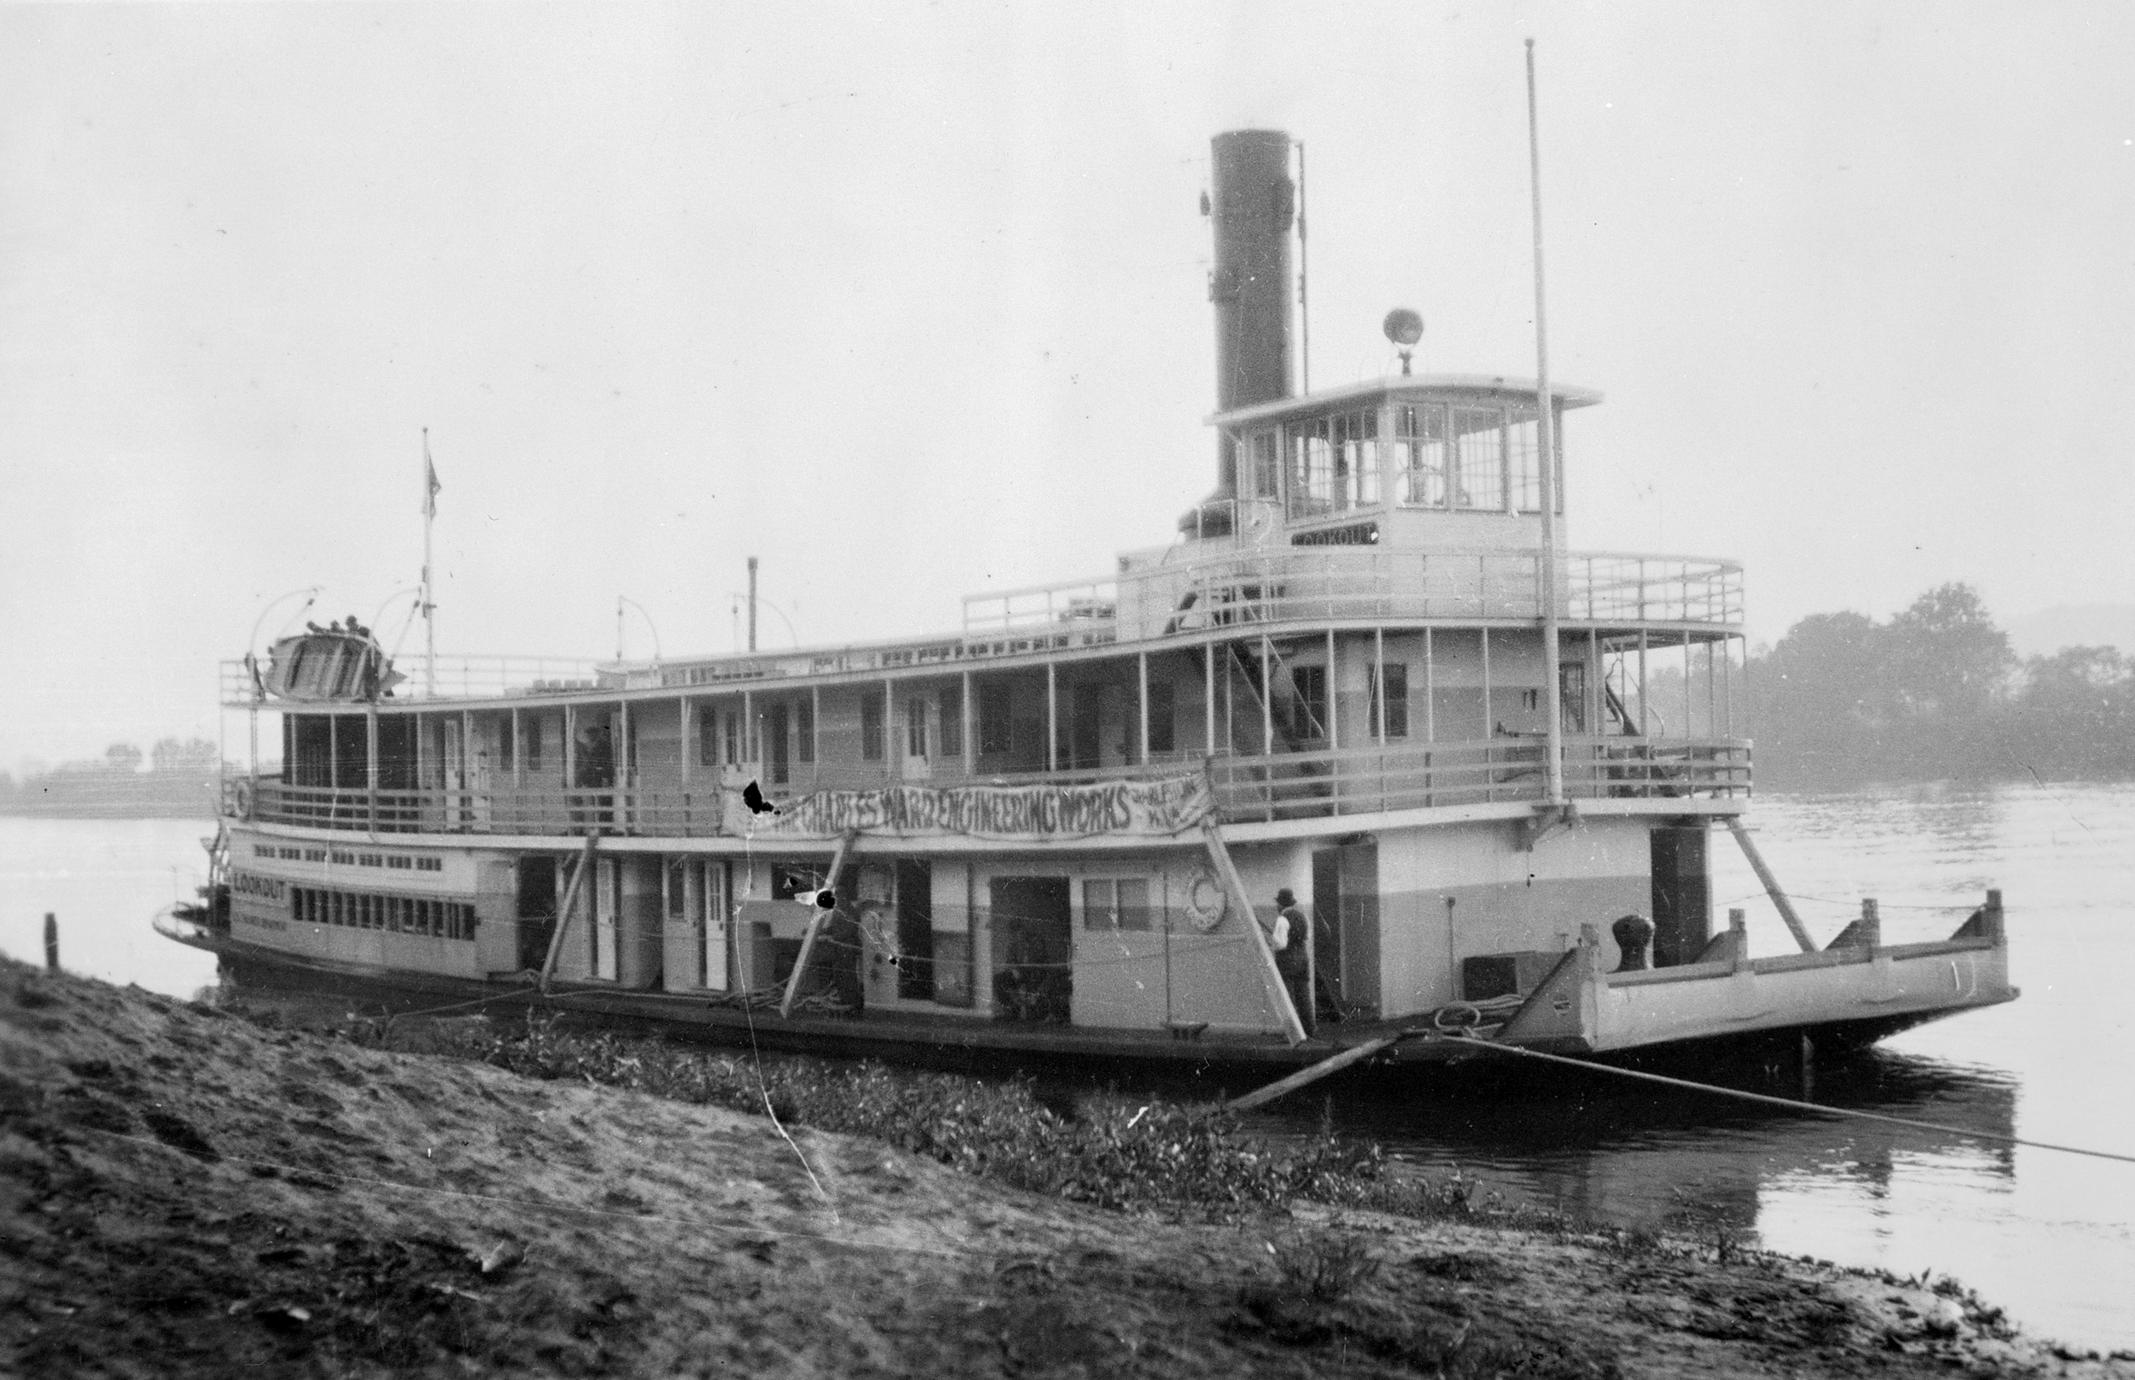 Lookout (Towboat, 1925-1926)